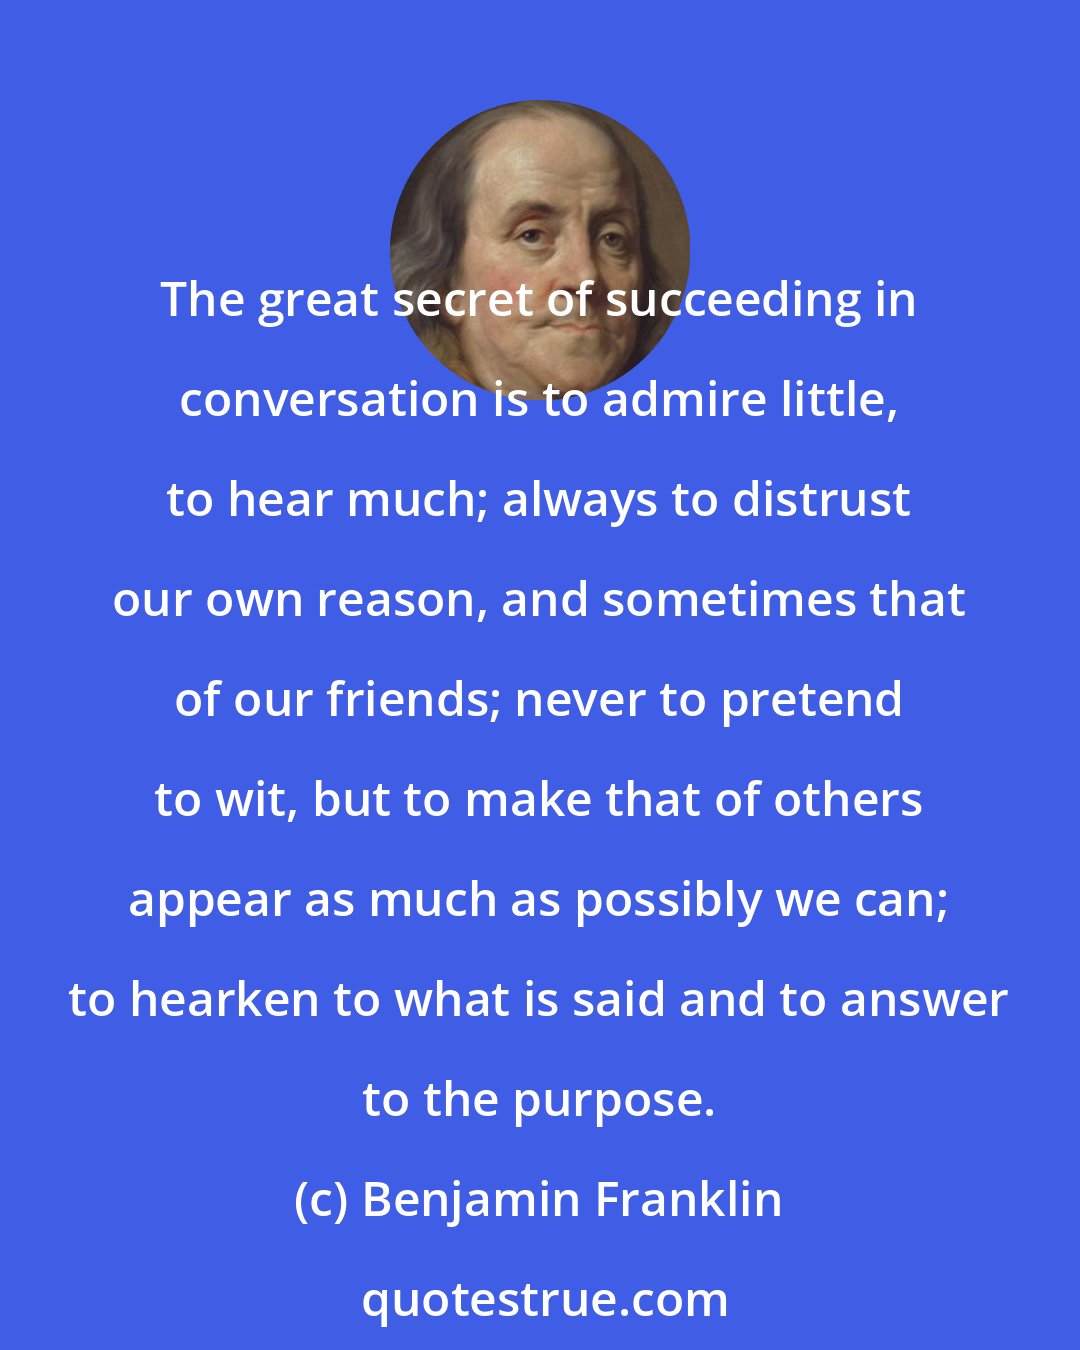 Benjamin Franklin: The great secret of succeeding in conversation is to admire little, to hear much; always to distrust our own reason, and sometimes that of our friends; never to pretend to wit, but to make that of others appear as much as possibly we can; to hearken to what is said and to answer to the purpose.